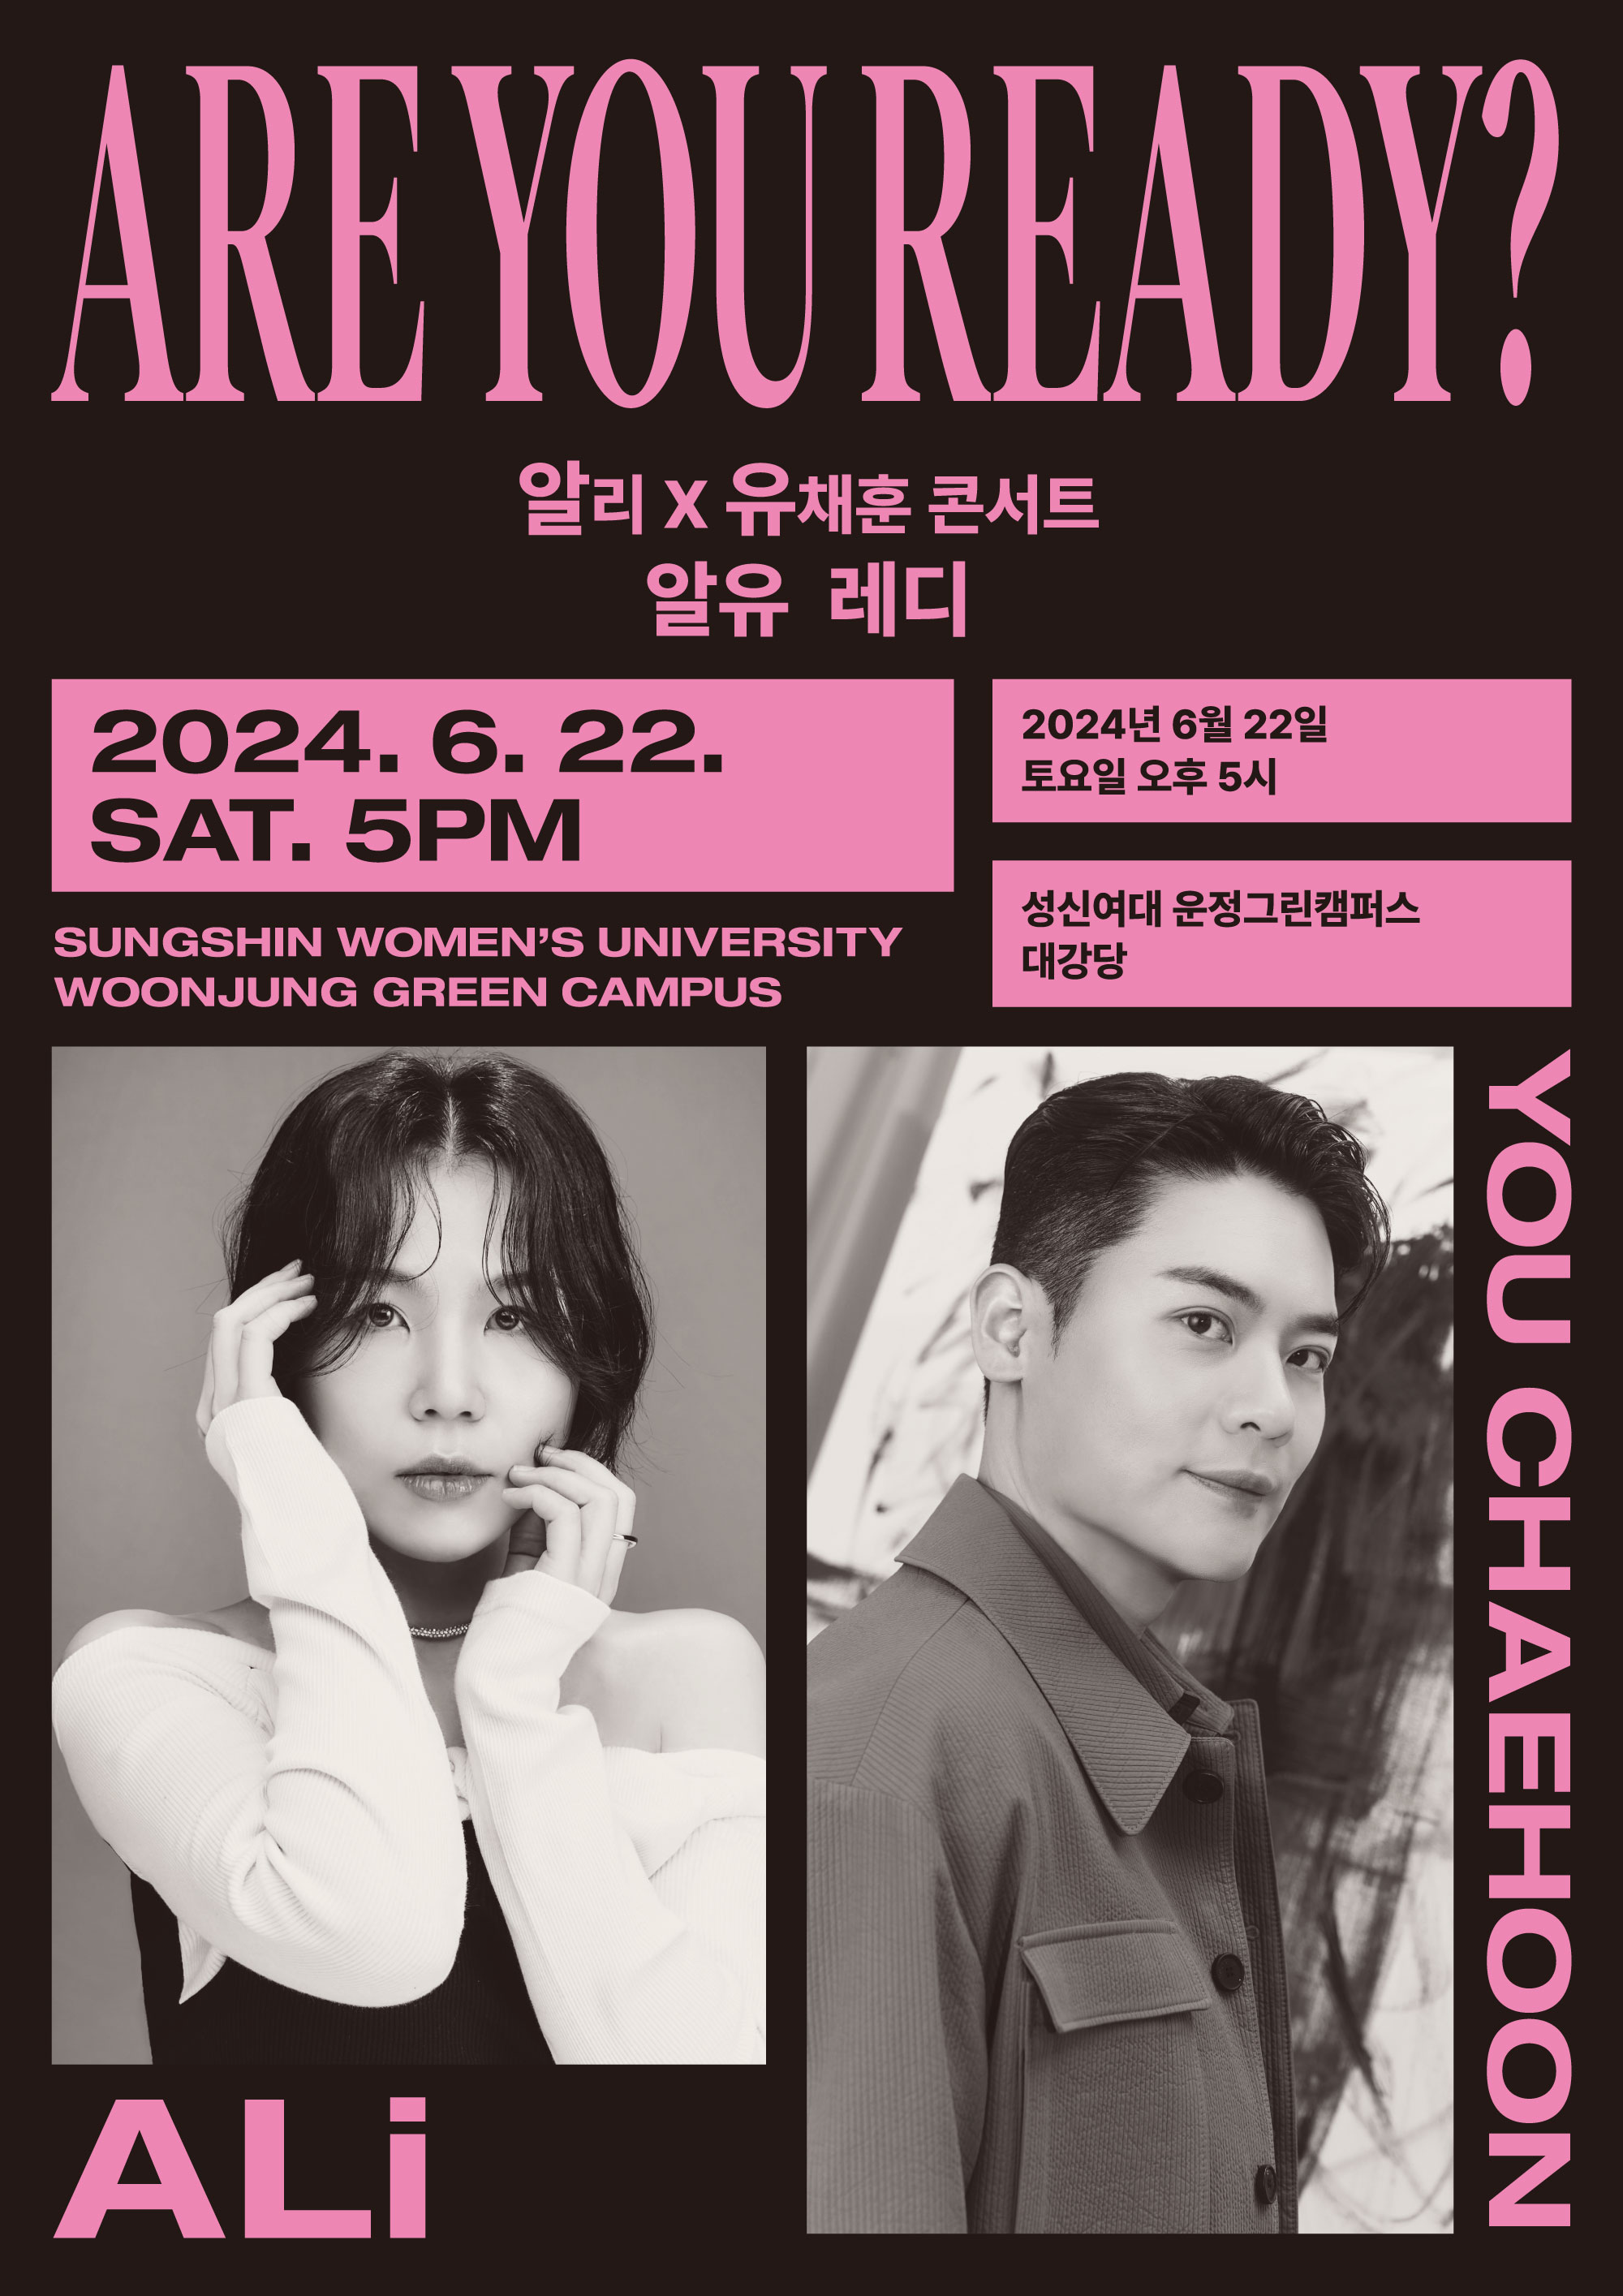 Ali and Yu ChaeHoon from LA POEM are joining hands to present a collaboration concert titled “Are You Ready”